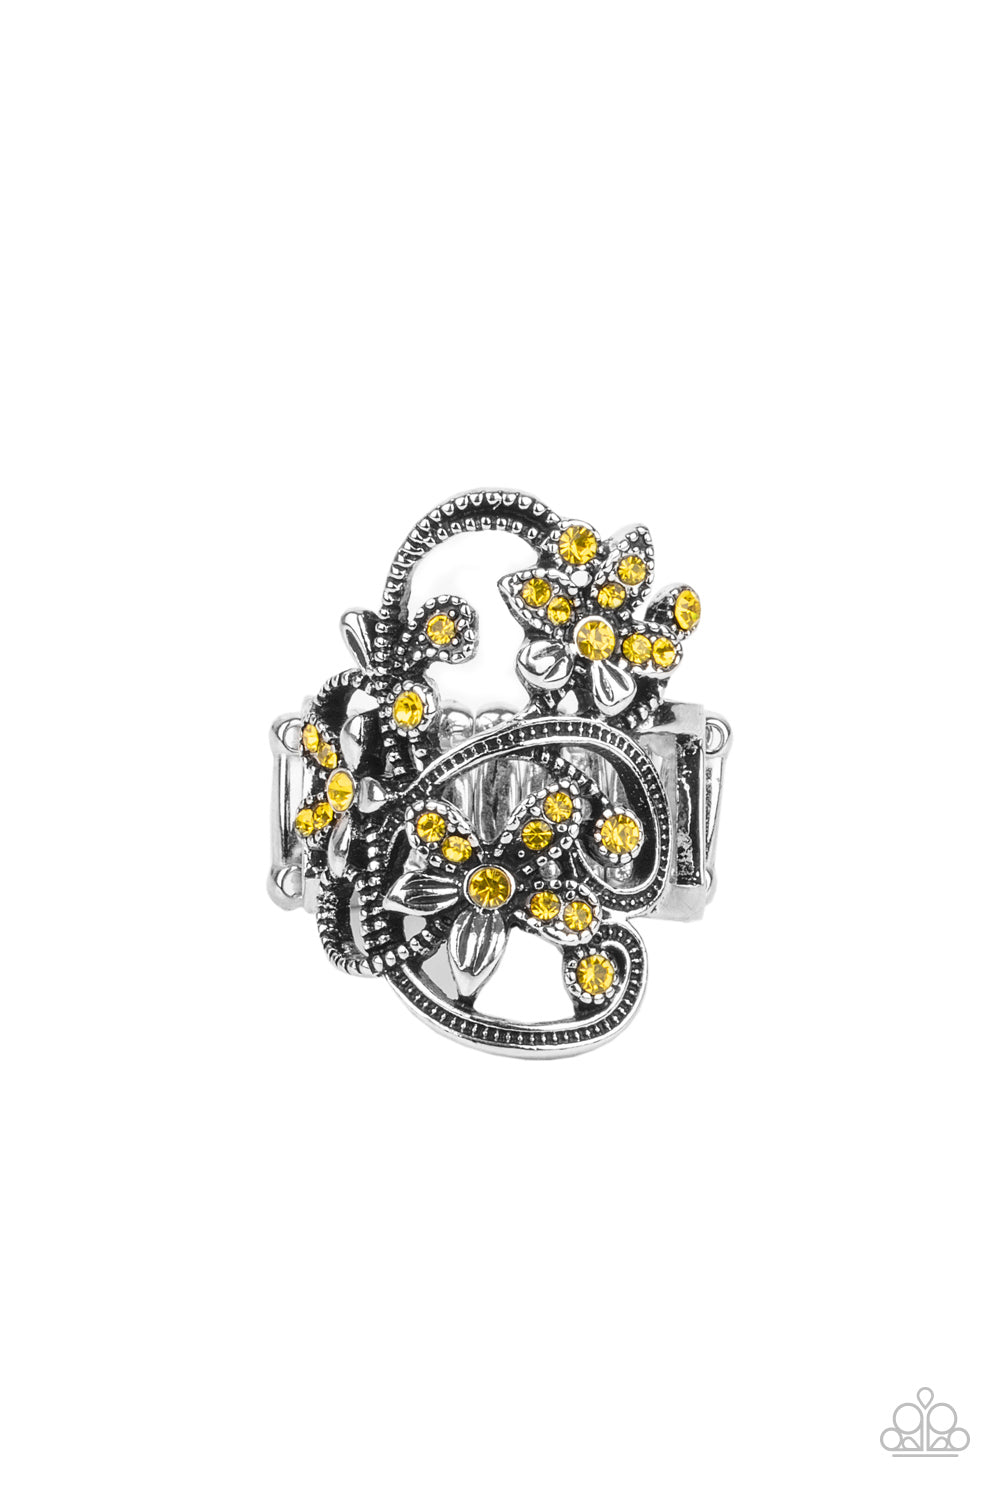 Dotted with dainty yellow rhinestone centers, antiqued silver floral frames bloom across a studded backdrop for a sparkly seasonal look. Features a stretchy band for a flexible fit.